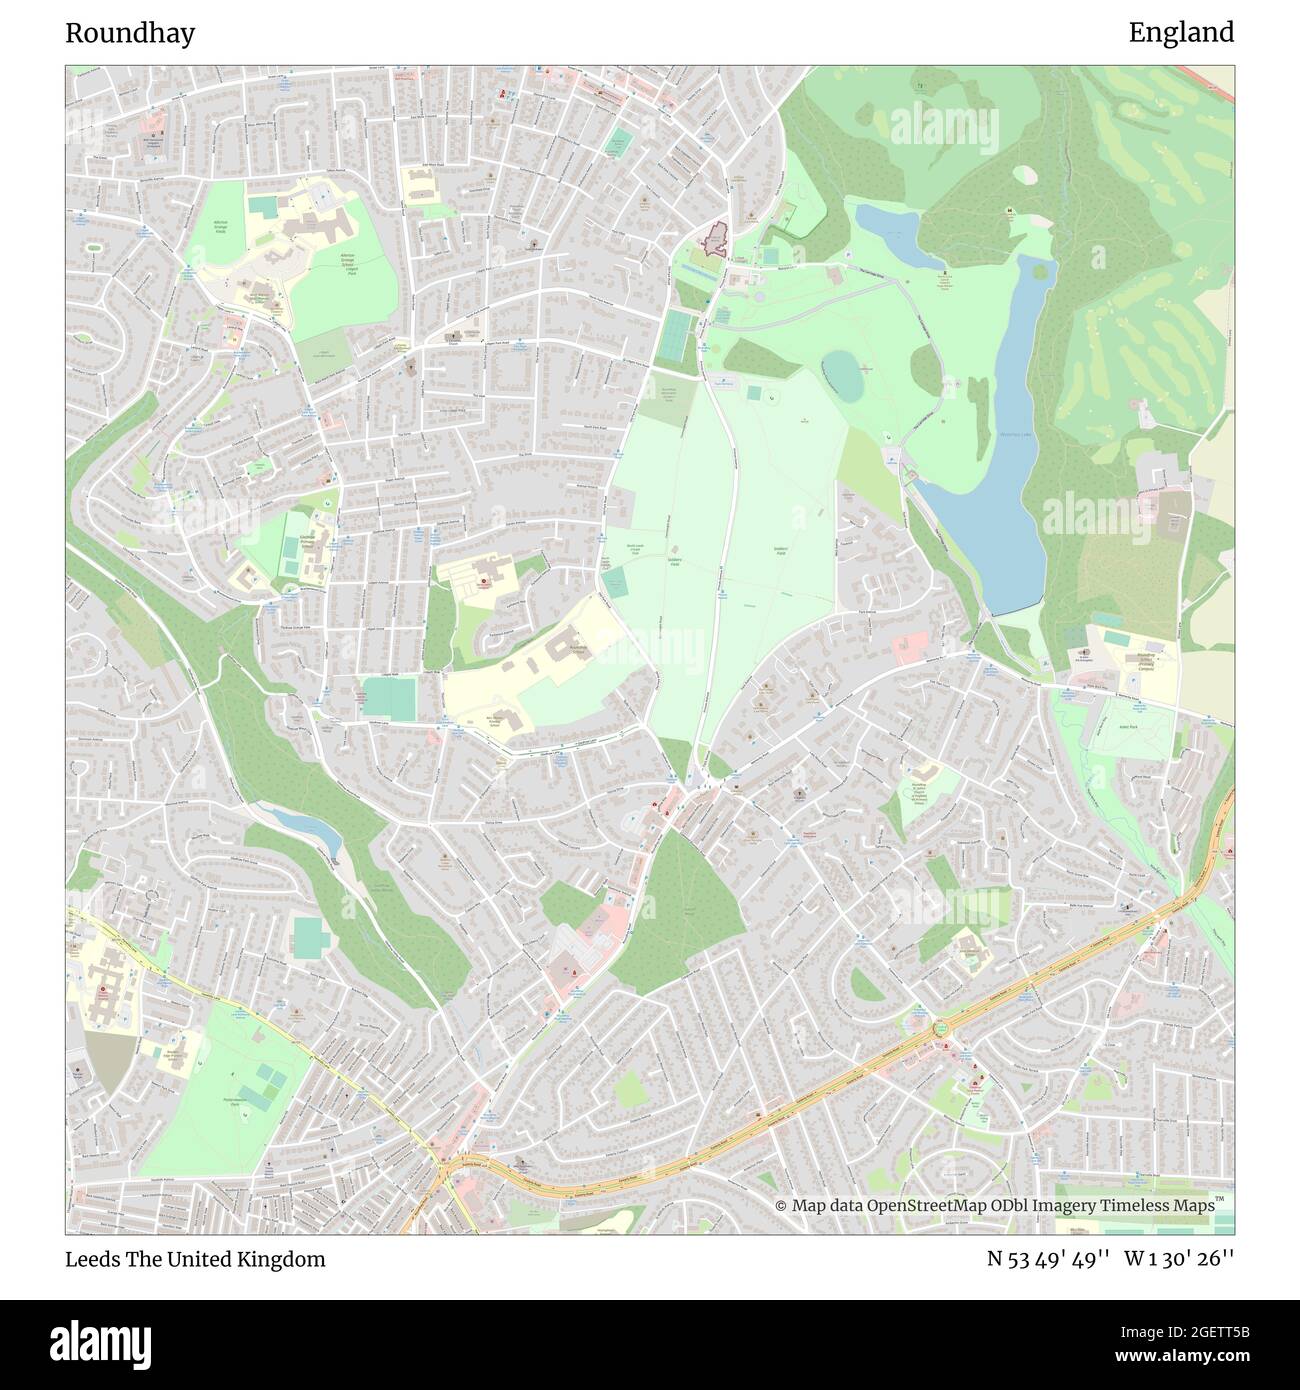 Roundhay, Leeds, United Kingdom, England, N 53 49' 49'', W 1 30' 26'', map, Timeless Map published in 2021. Travelers, explorers and adventurers like Florence Nightingale, David Livingstone, Ernest Shackleton, Lewis and Clark and Sherlock Holmes relied on maps to plan travels to the world's most remote corners, Timeless Maps is mapping most locations on the globe, showing the achievement of great dreams Stock Photo